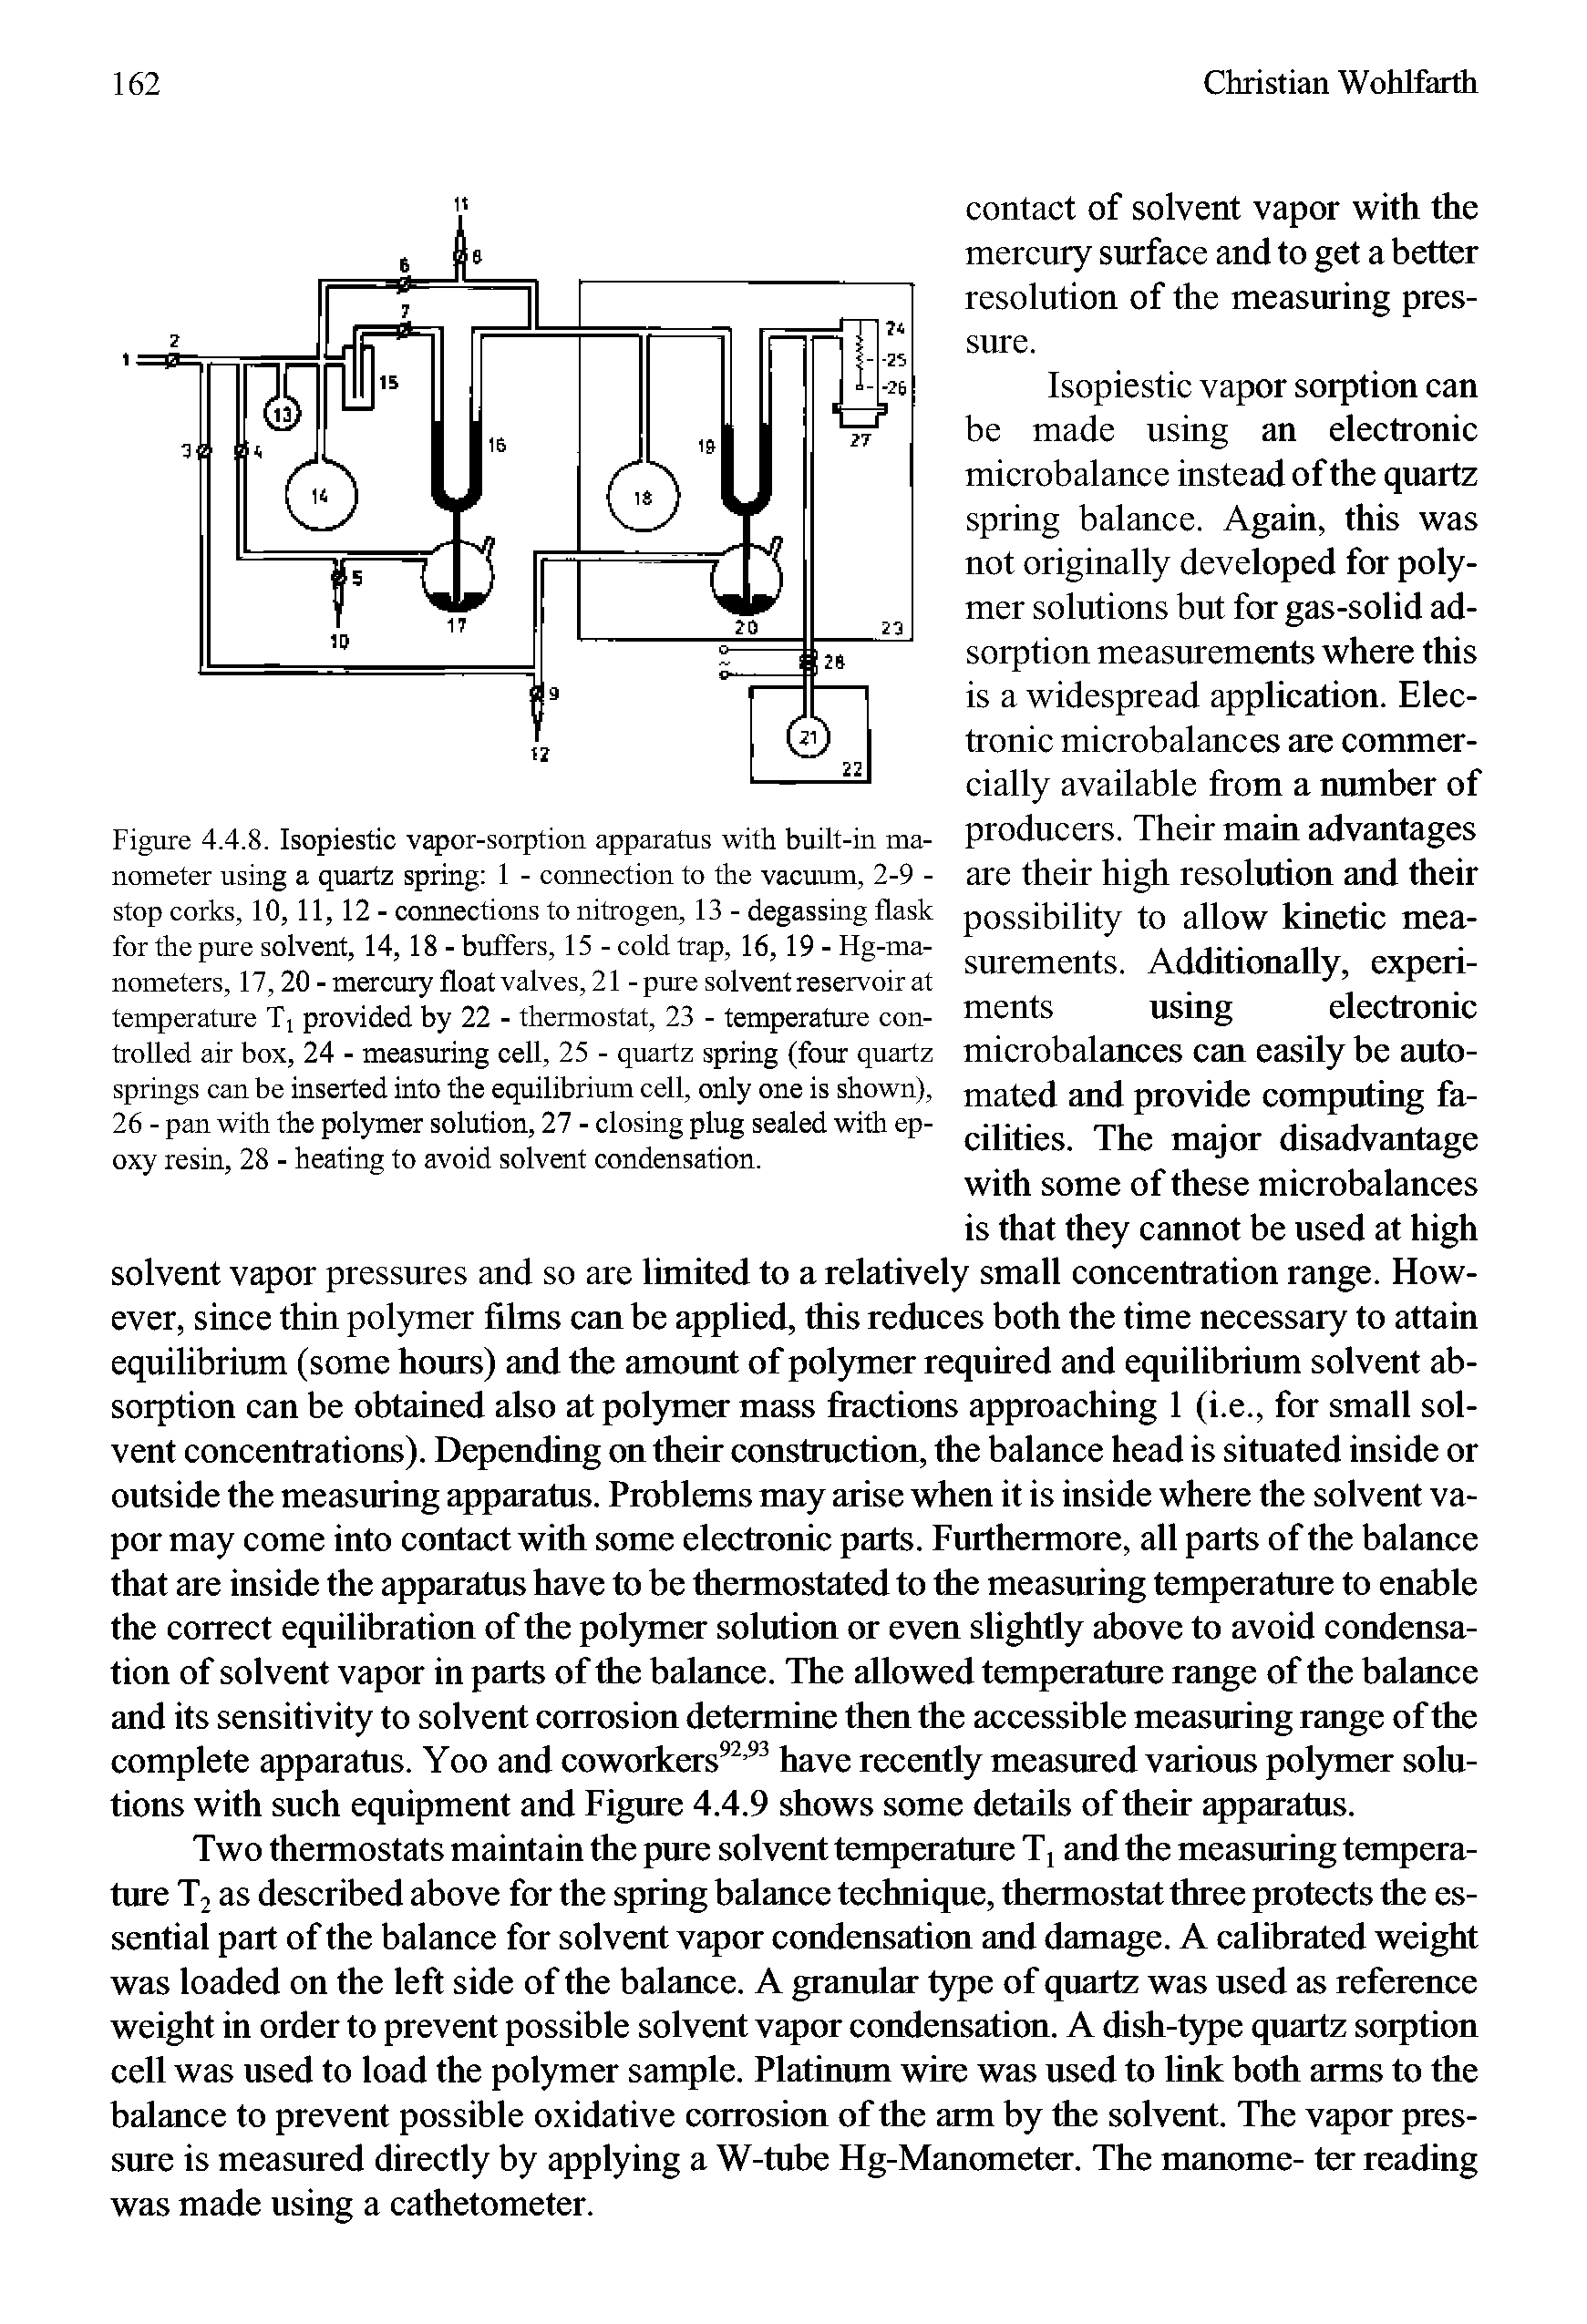 Figure 4.4.8. Isopiestic vapor-sorption apparatus with built-in manometer using a quartz spring 1 - connection to the vacuum, 2-9 -stop corks, 10, 11, 12 - connections to nitrogen, 13 - degassing flask for the pure solvent, 14, 18 - buffers, 15 - cold trap, 16,19 - Hg-ma-nometers, 17,20 - mercury float valves, 21 -pure solvent reservoir at temperature Ti provided by 22 - thermostat, 23 - temperature controlled air box, 24 - measuring cell, 25 - quartz spring (four quartz springs can be inserted into the equilibrium cell, only one is shown), 26 - pan with the polymer solution, 27 - closing plug sealed with epoxy resin, 28 - heating to avoid solvent condensation.